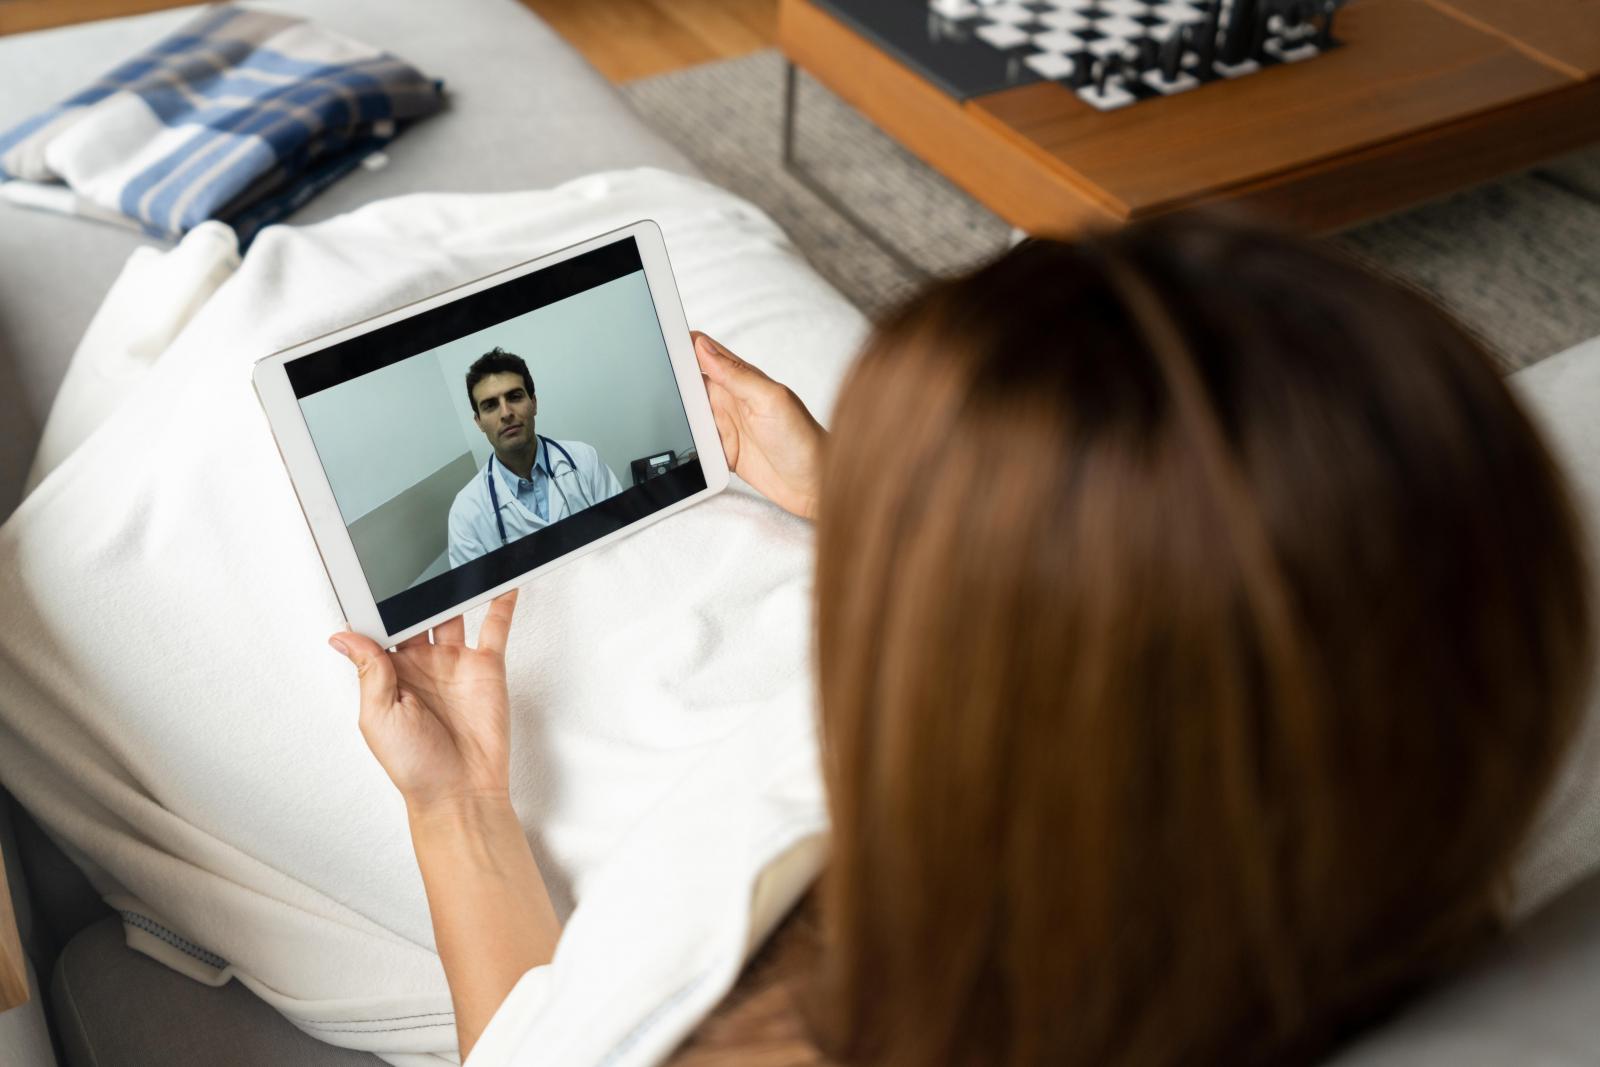 Telehealth home video visits allow you to meet with your University Health Center provider from the comfort of your home via mobile device, tablet or computer.